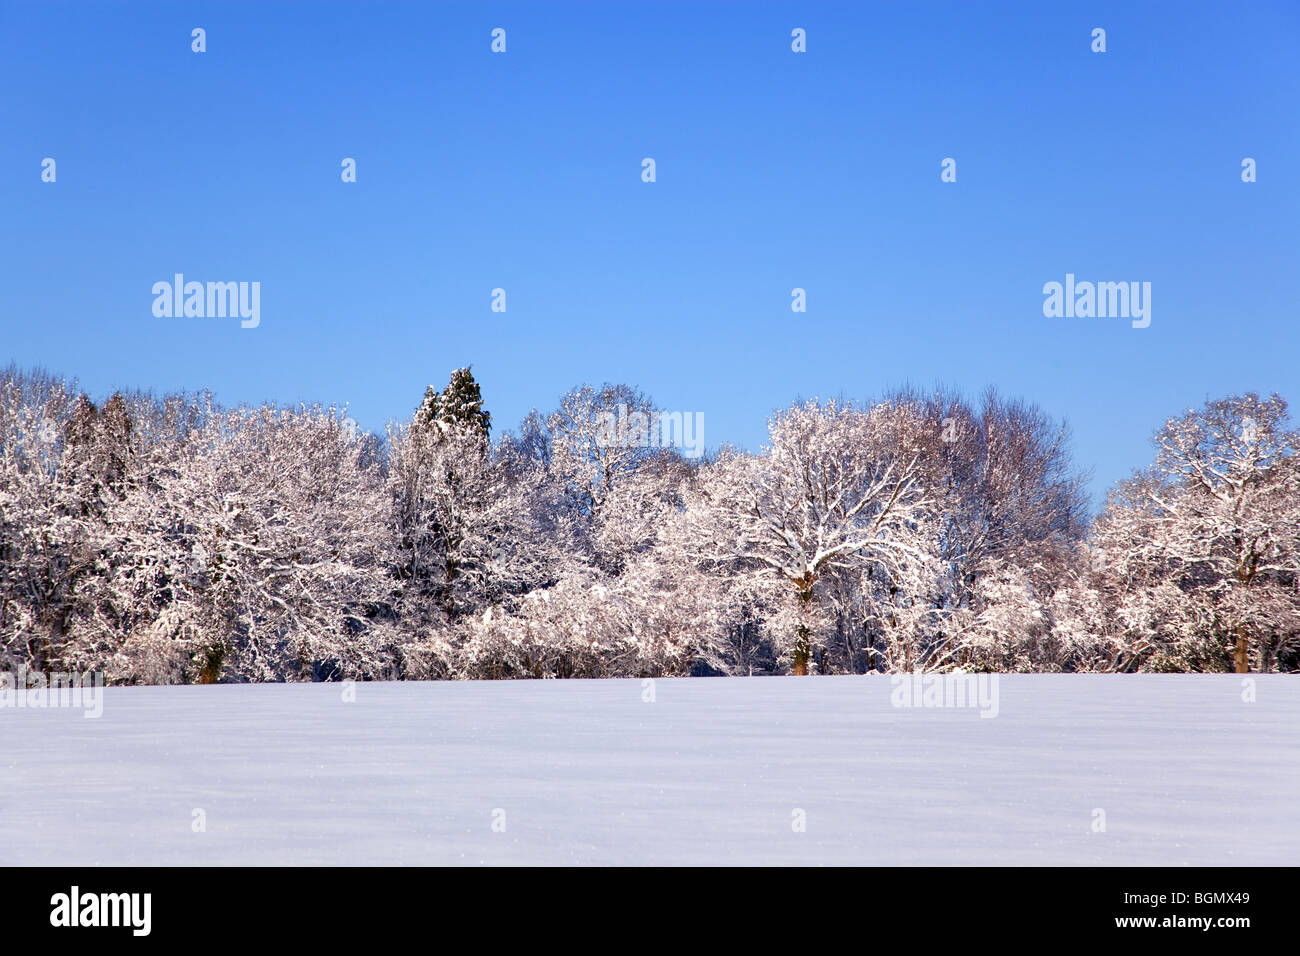 Landscape photo of a field and trees covered in fresh snow with a clear blue sky. Stock Photo